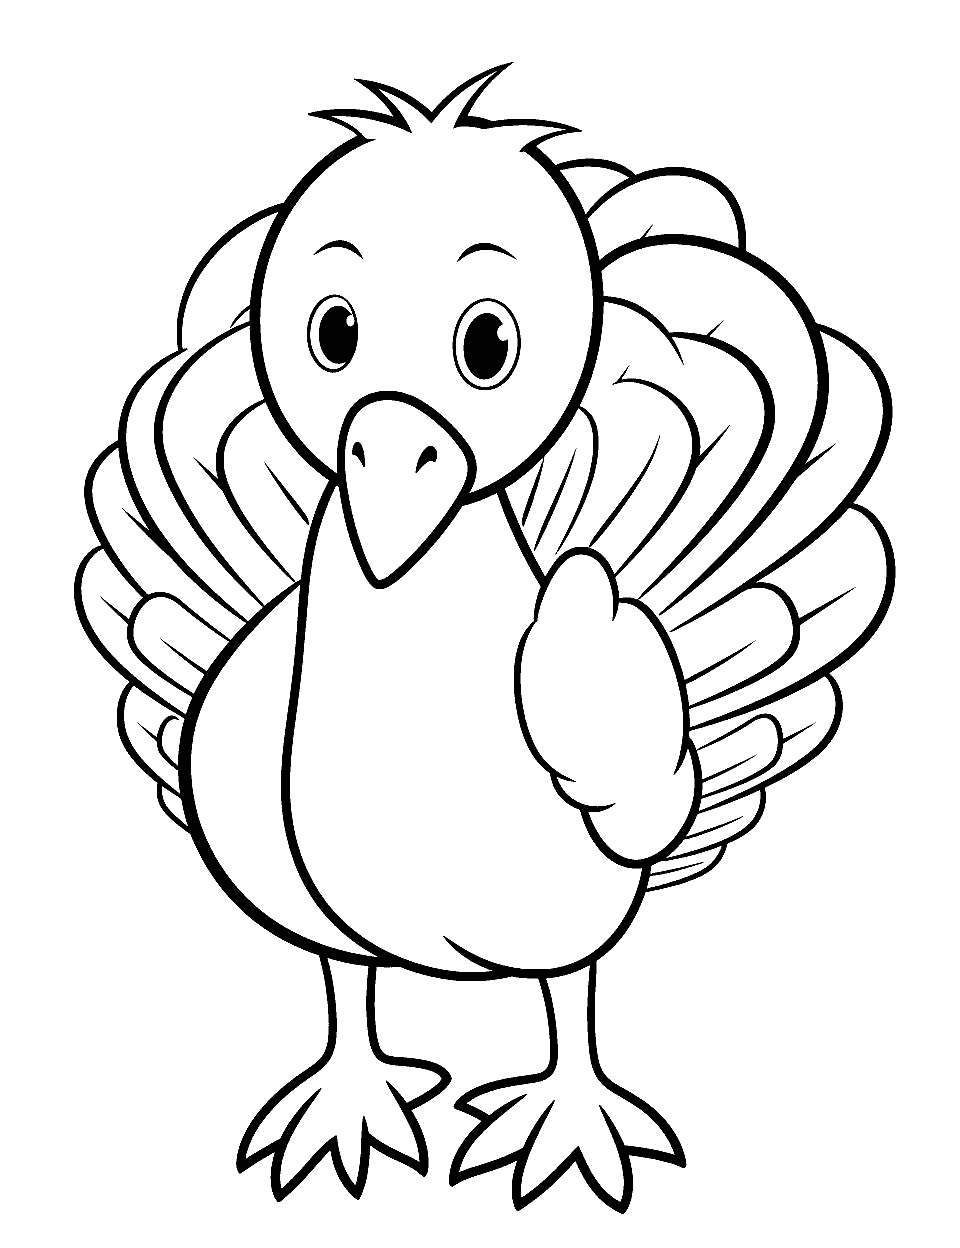 Cute Baby Turkey Coloring Page - A coloring page featuring a cartoon representation of a baby turkey.